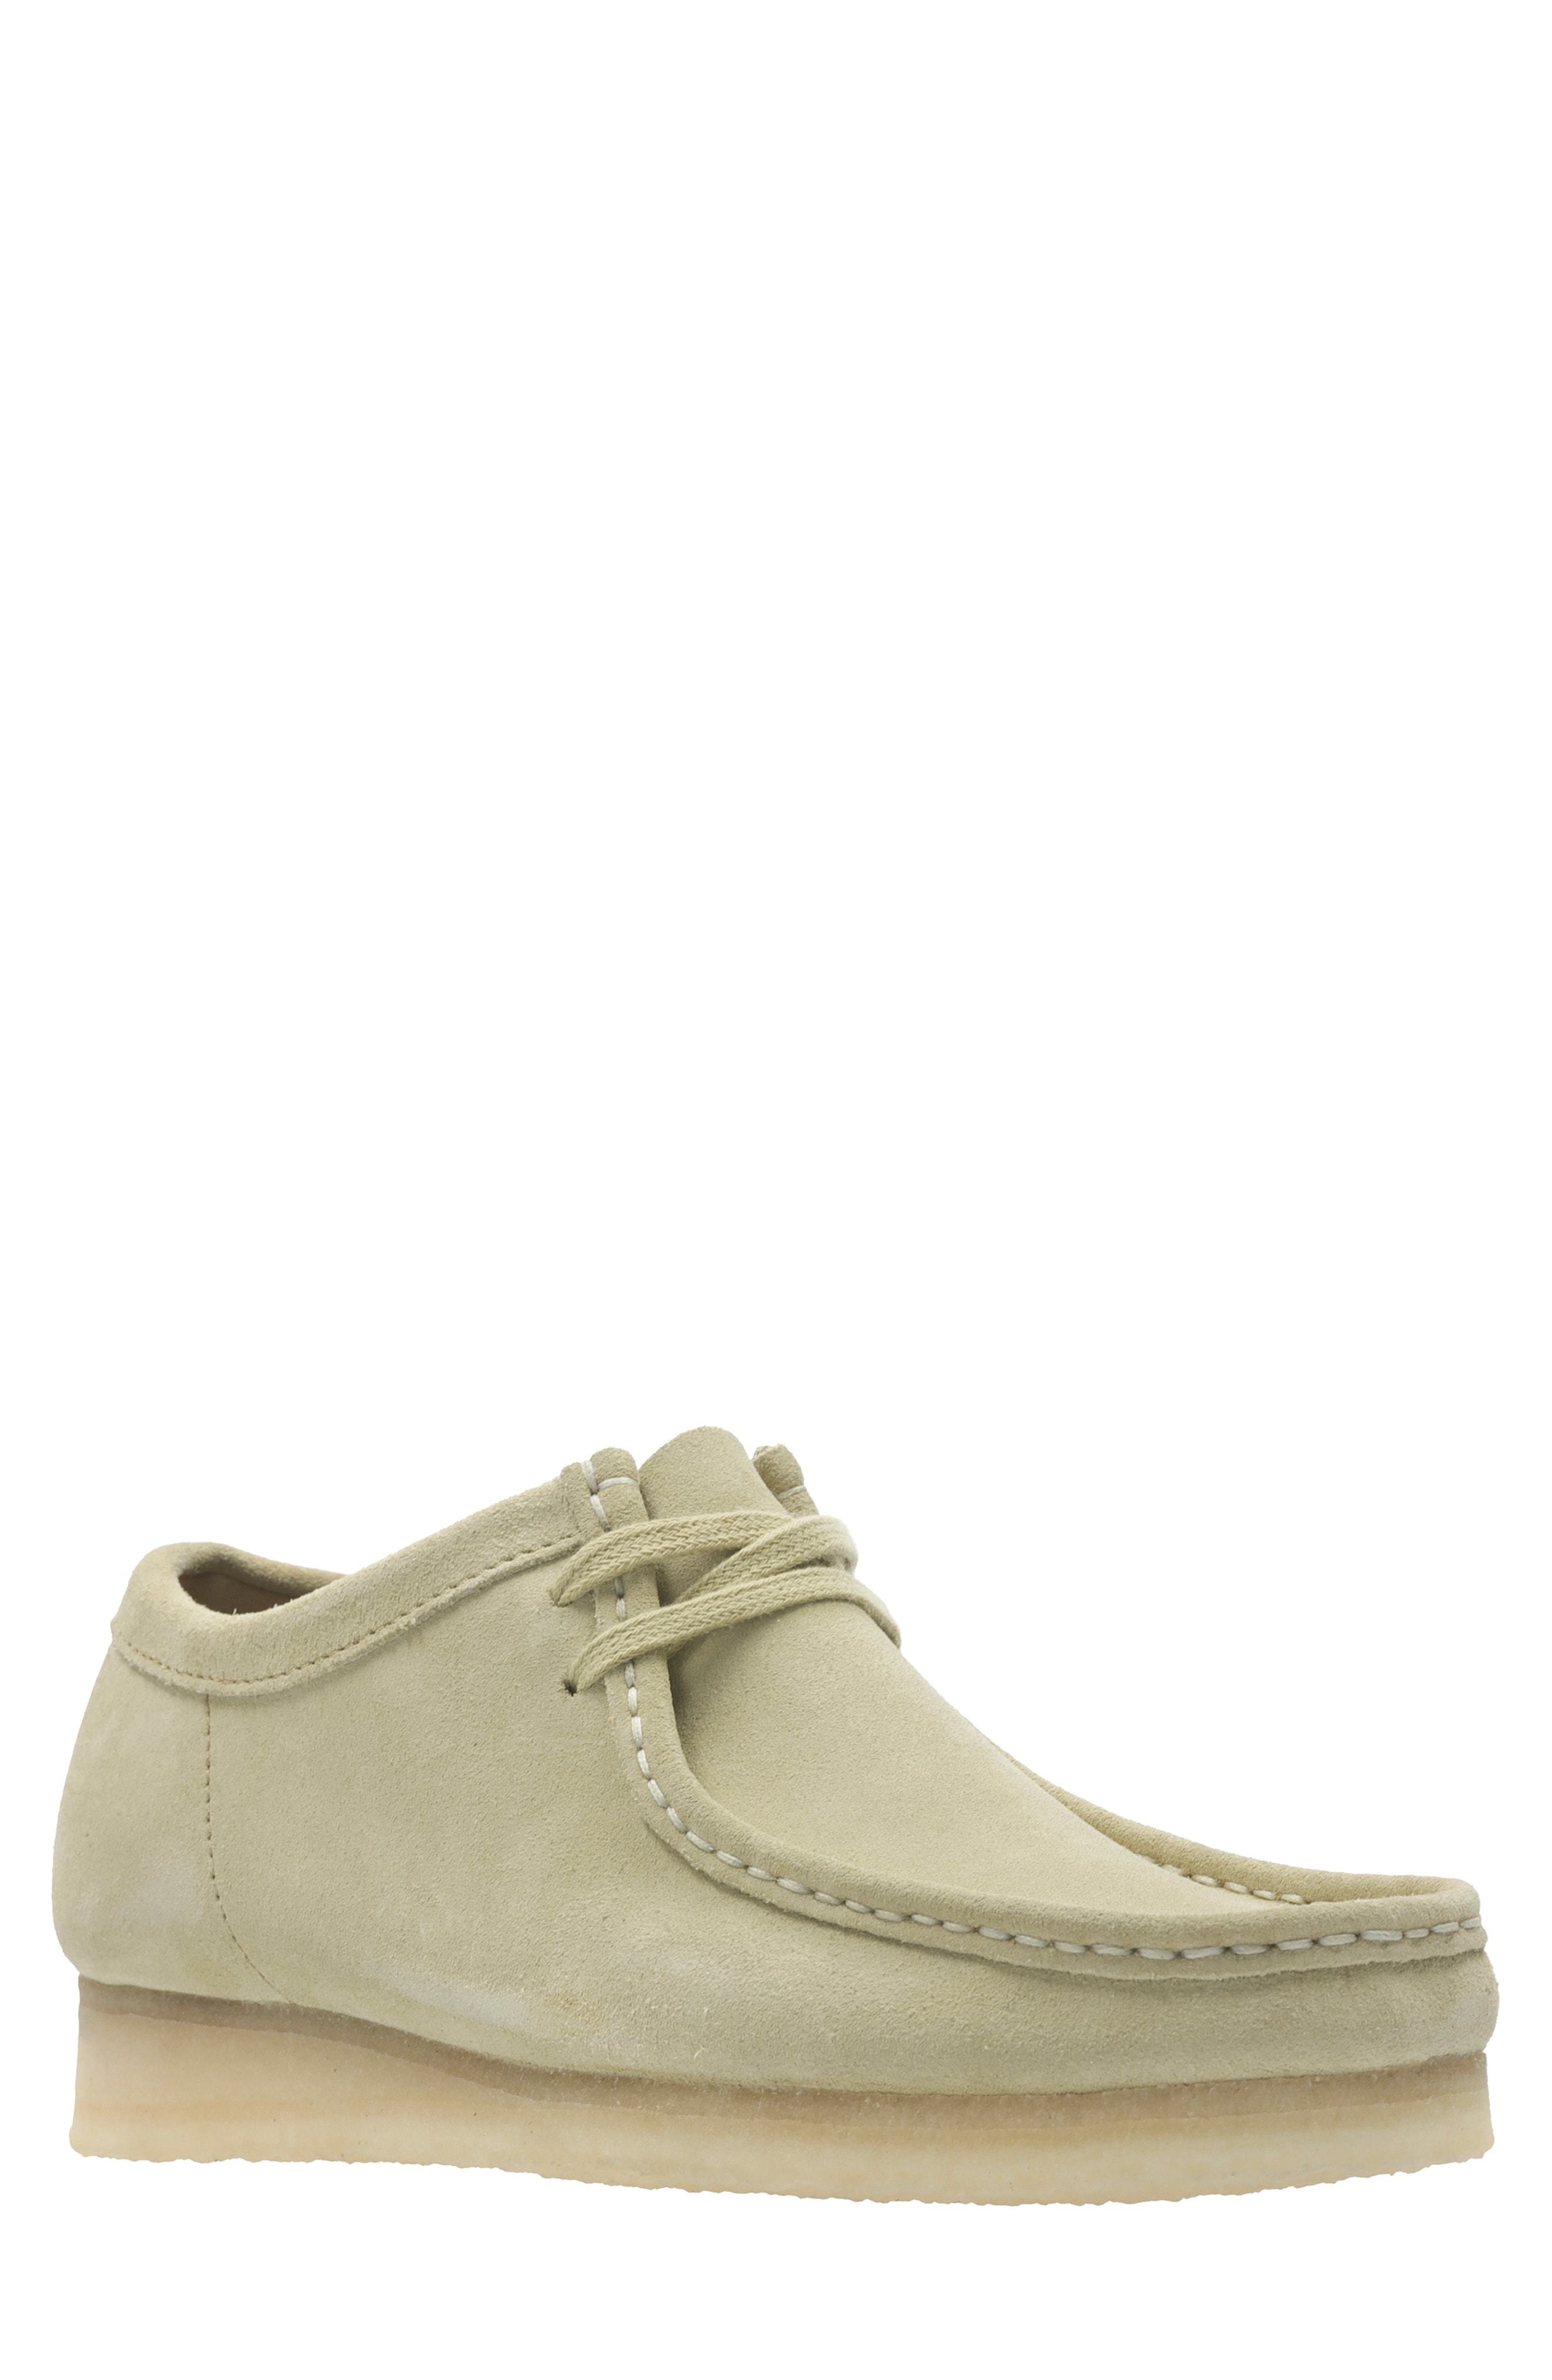 nordstrom clarks womens shoes